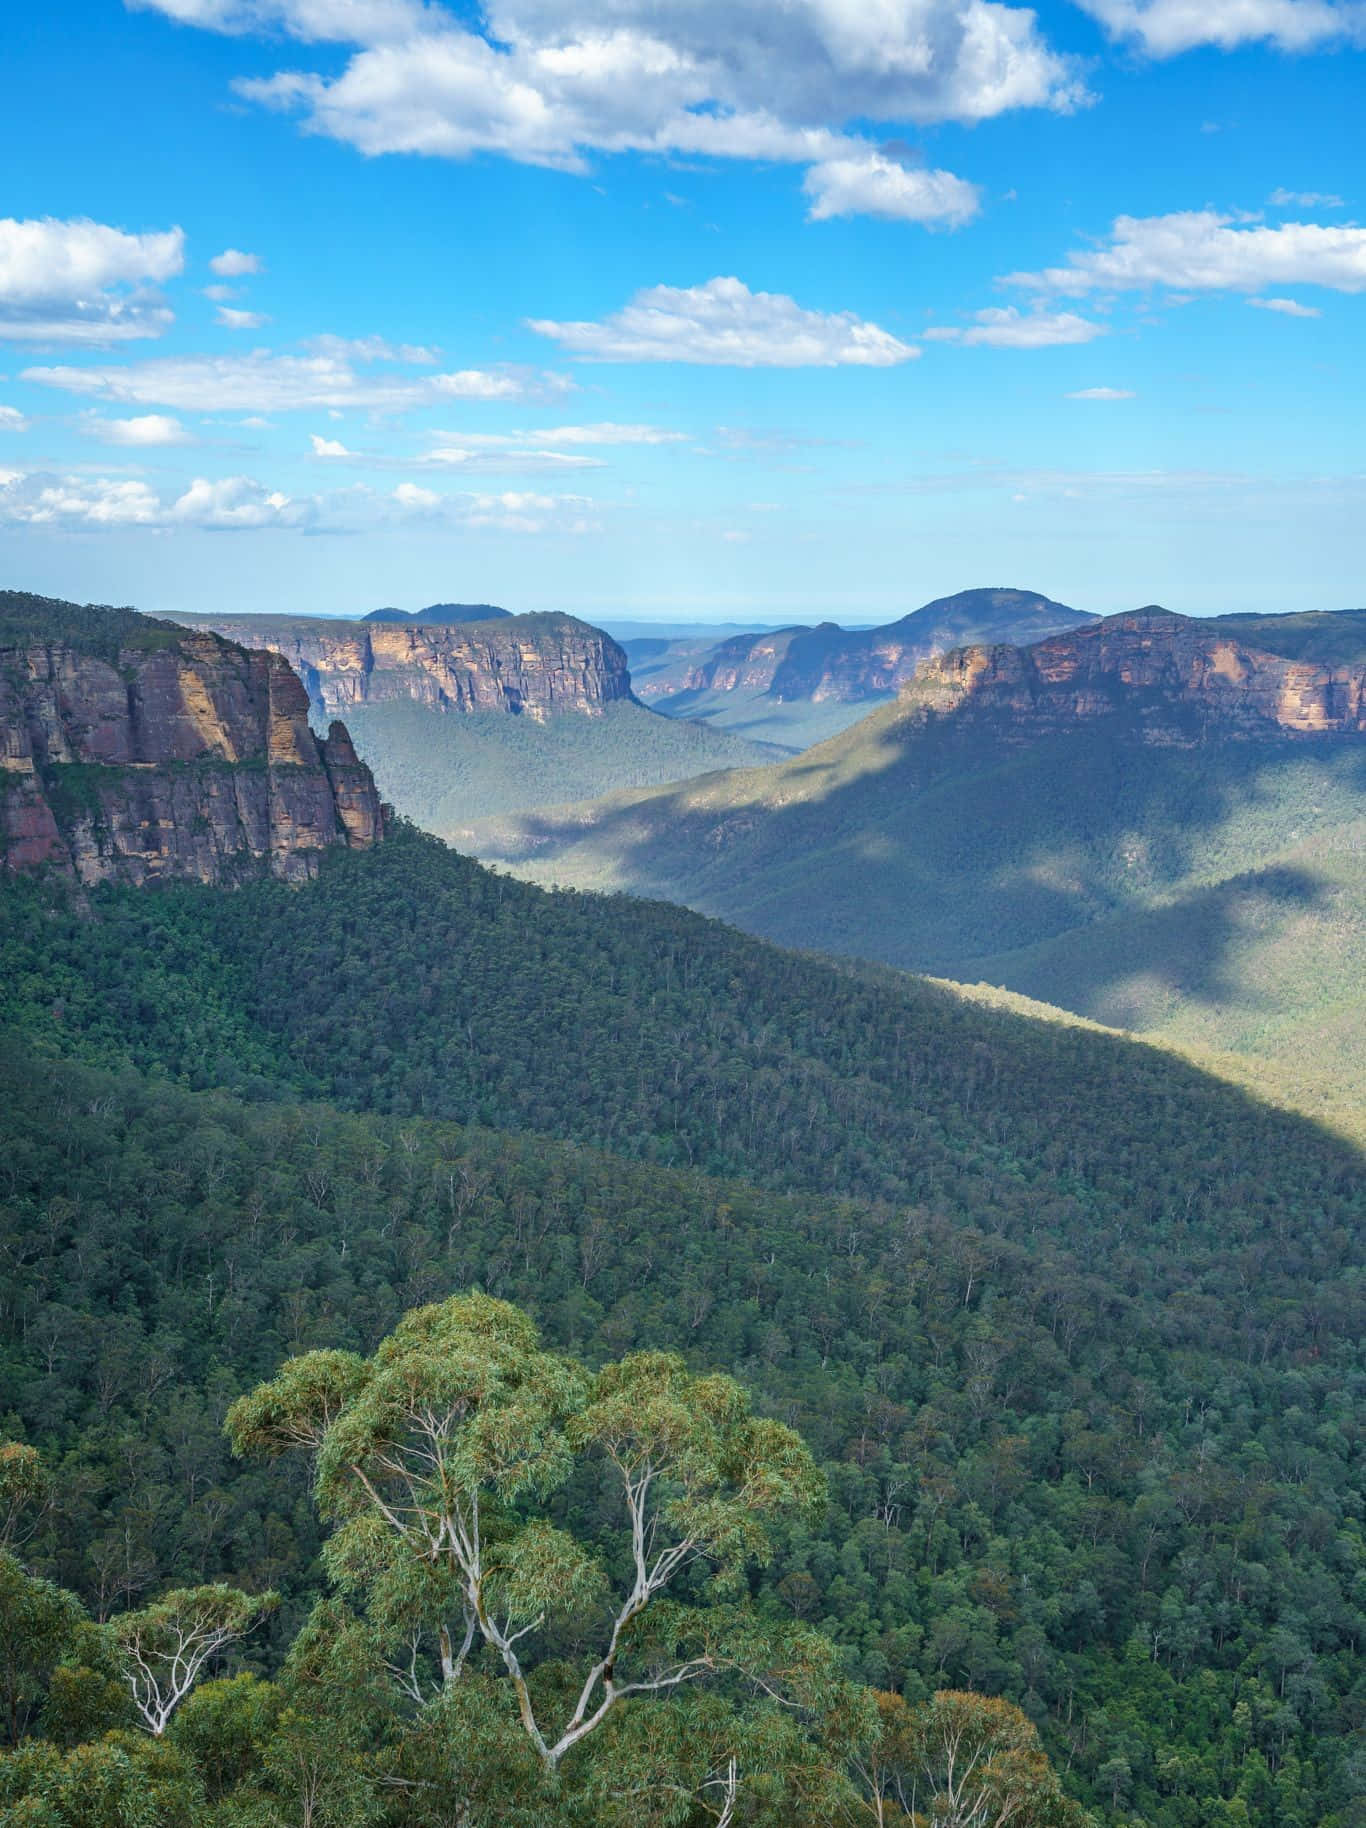 "Beauty of Blue Mountains National Park" Wallpaper